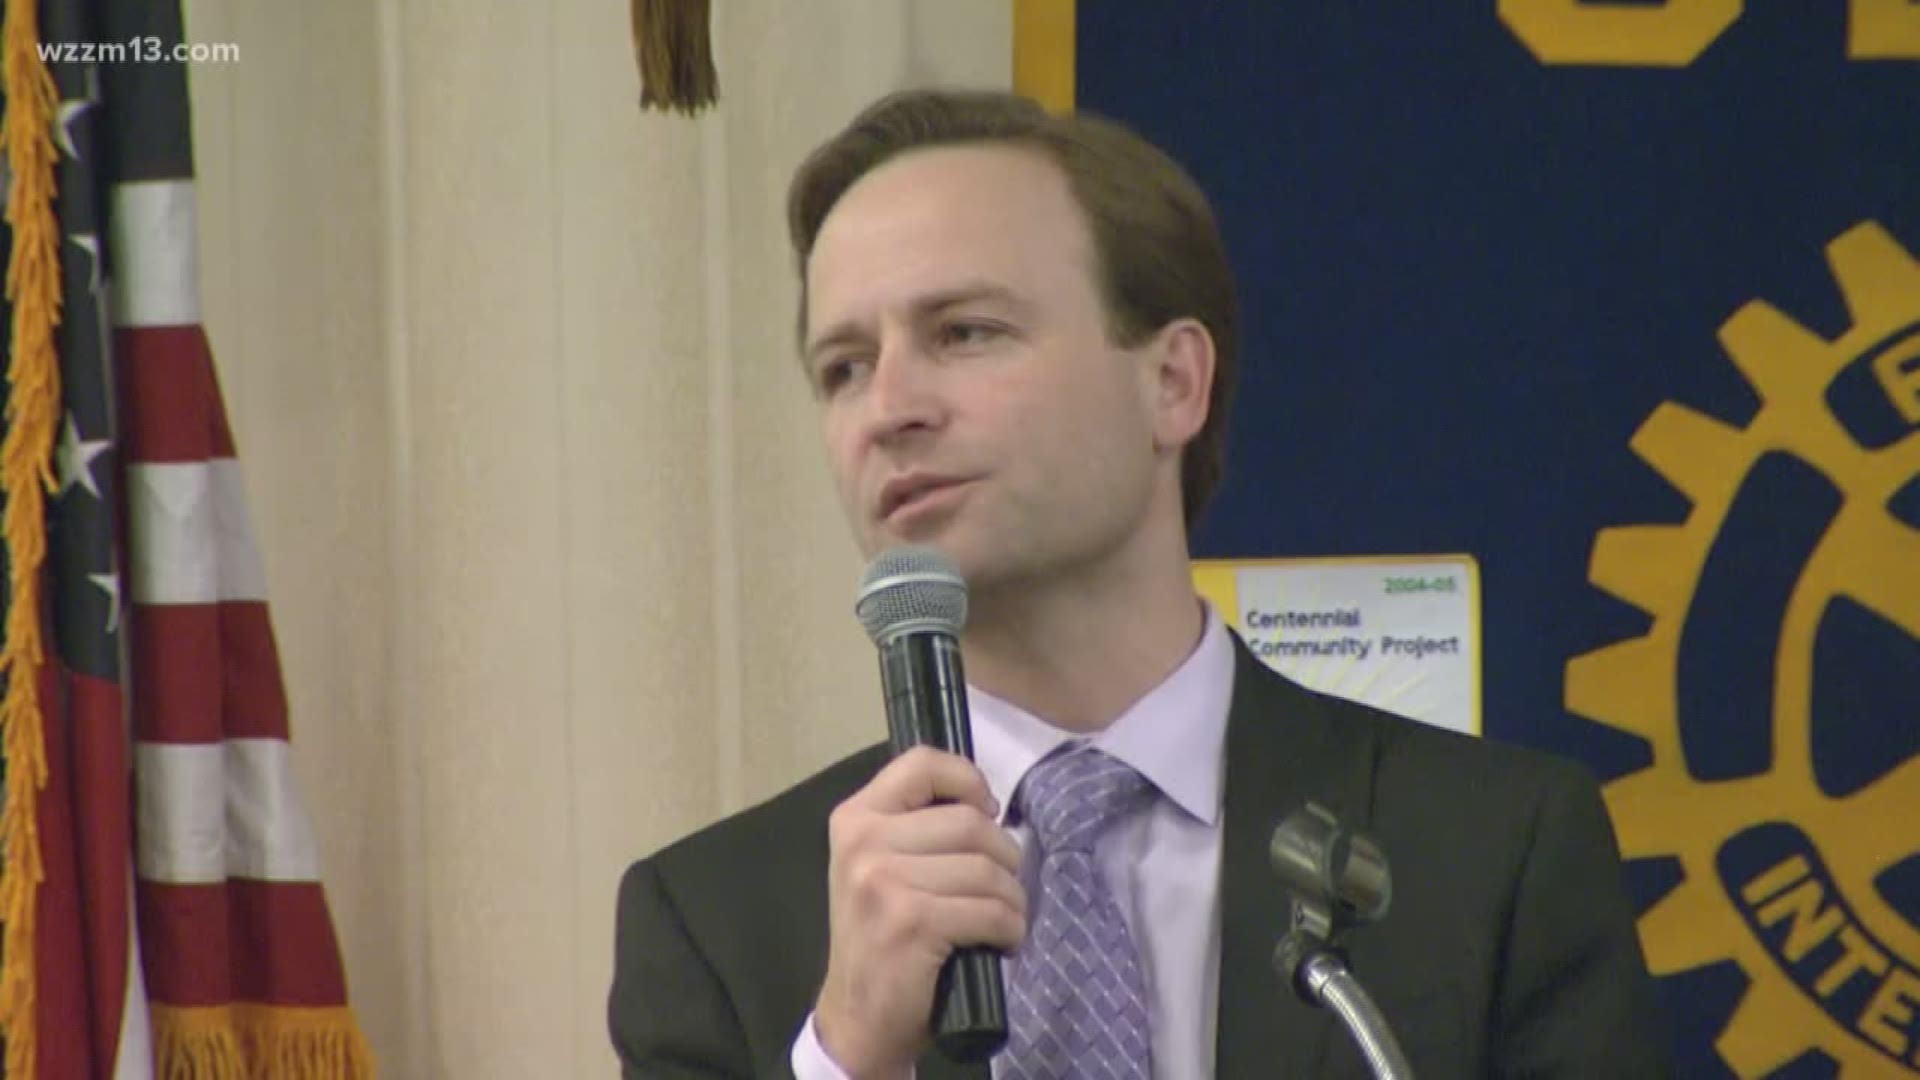 Lt. Governor Calley makes stops in Muskegon County